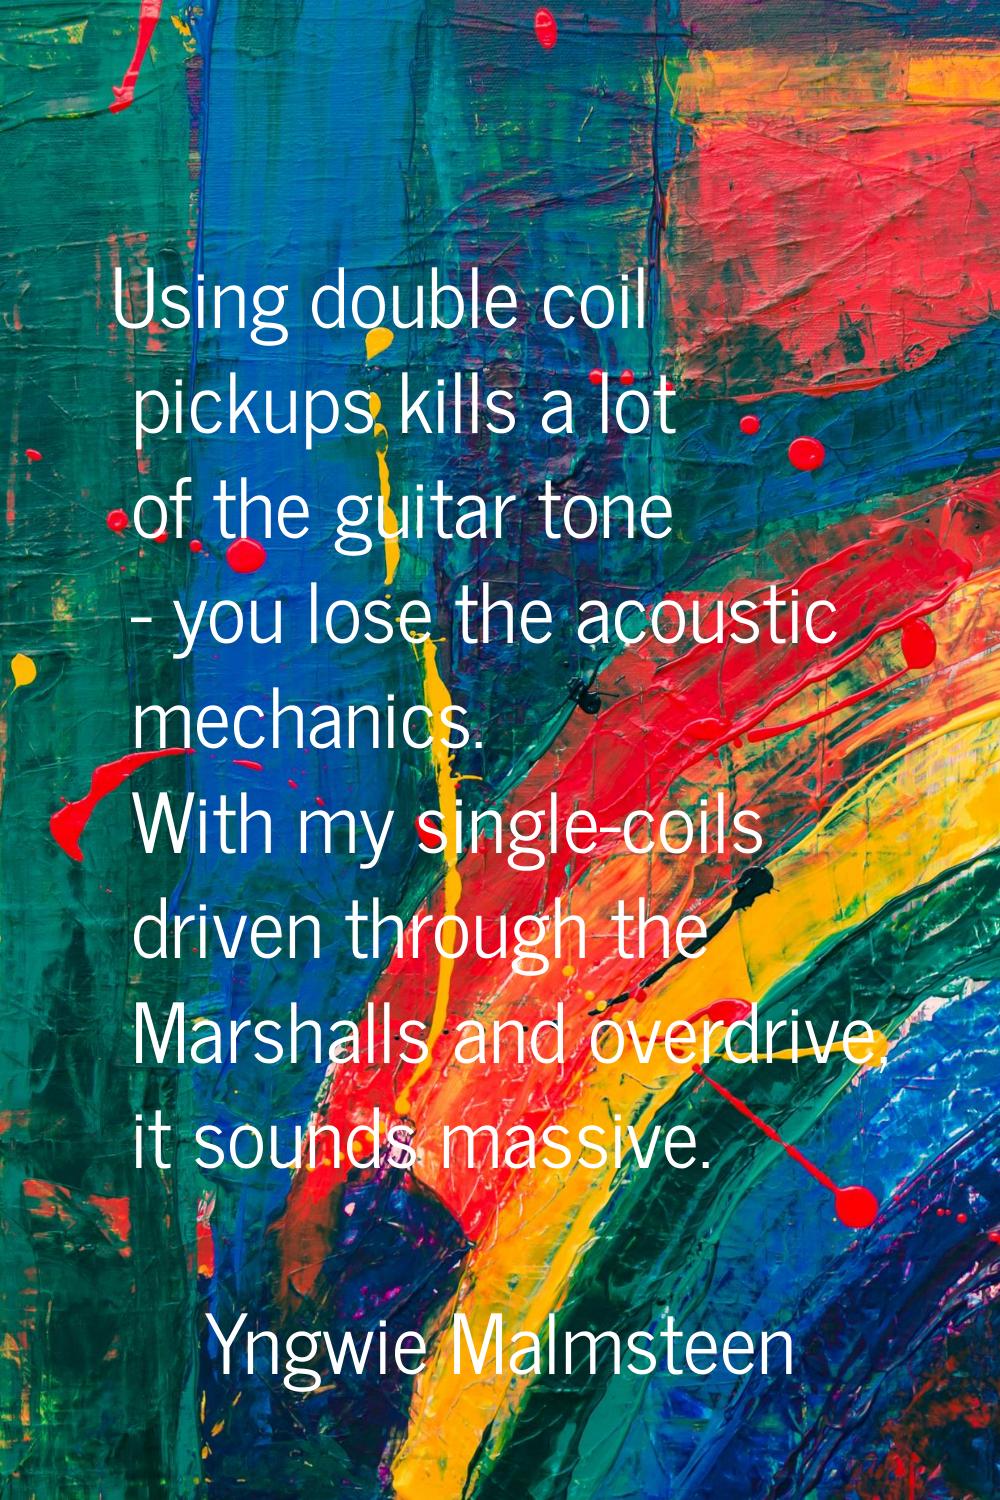 Using double coil pickups kills a lot of the guitar tone - you lose the acoustic mechanics. With my